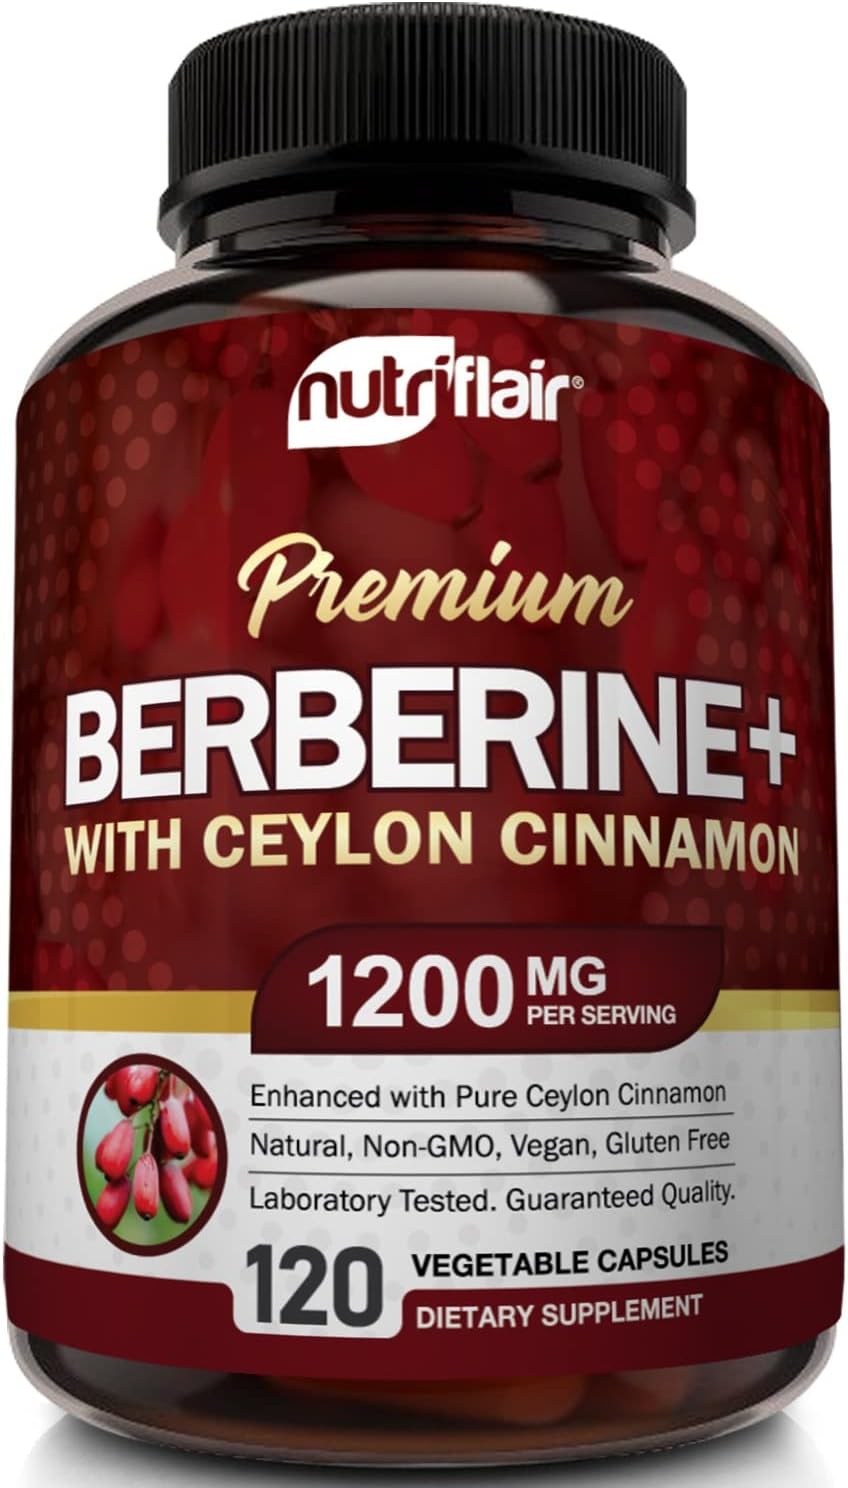 NutriFlair Premium Berberine HCL 1200mg, 120 Capsules - Plus Pure True Ceylon Cinnamon, HCI Root Supplements Pills - Supports Glucose Metabolism, Immune System, Healthy Weight Management